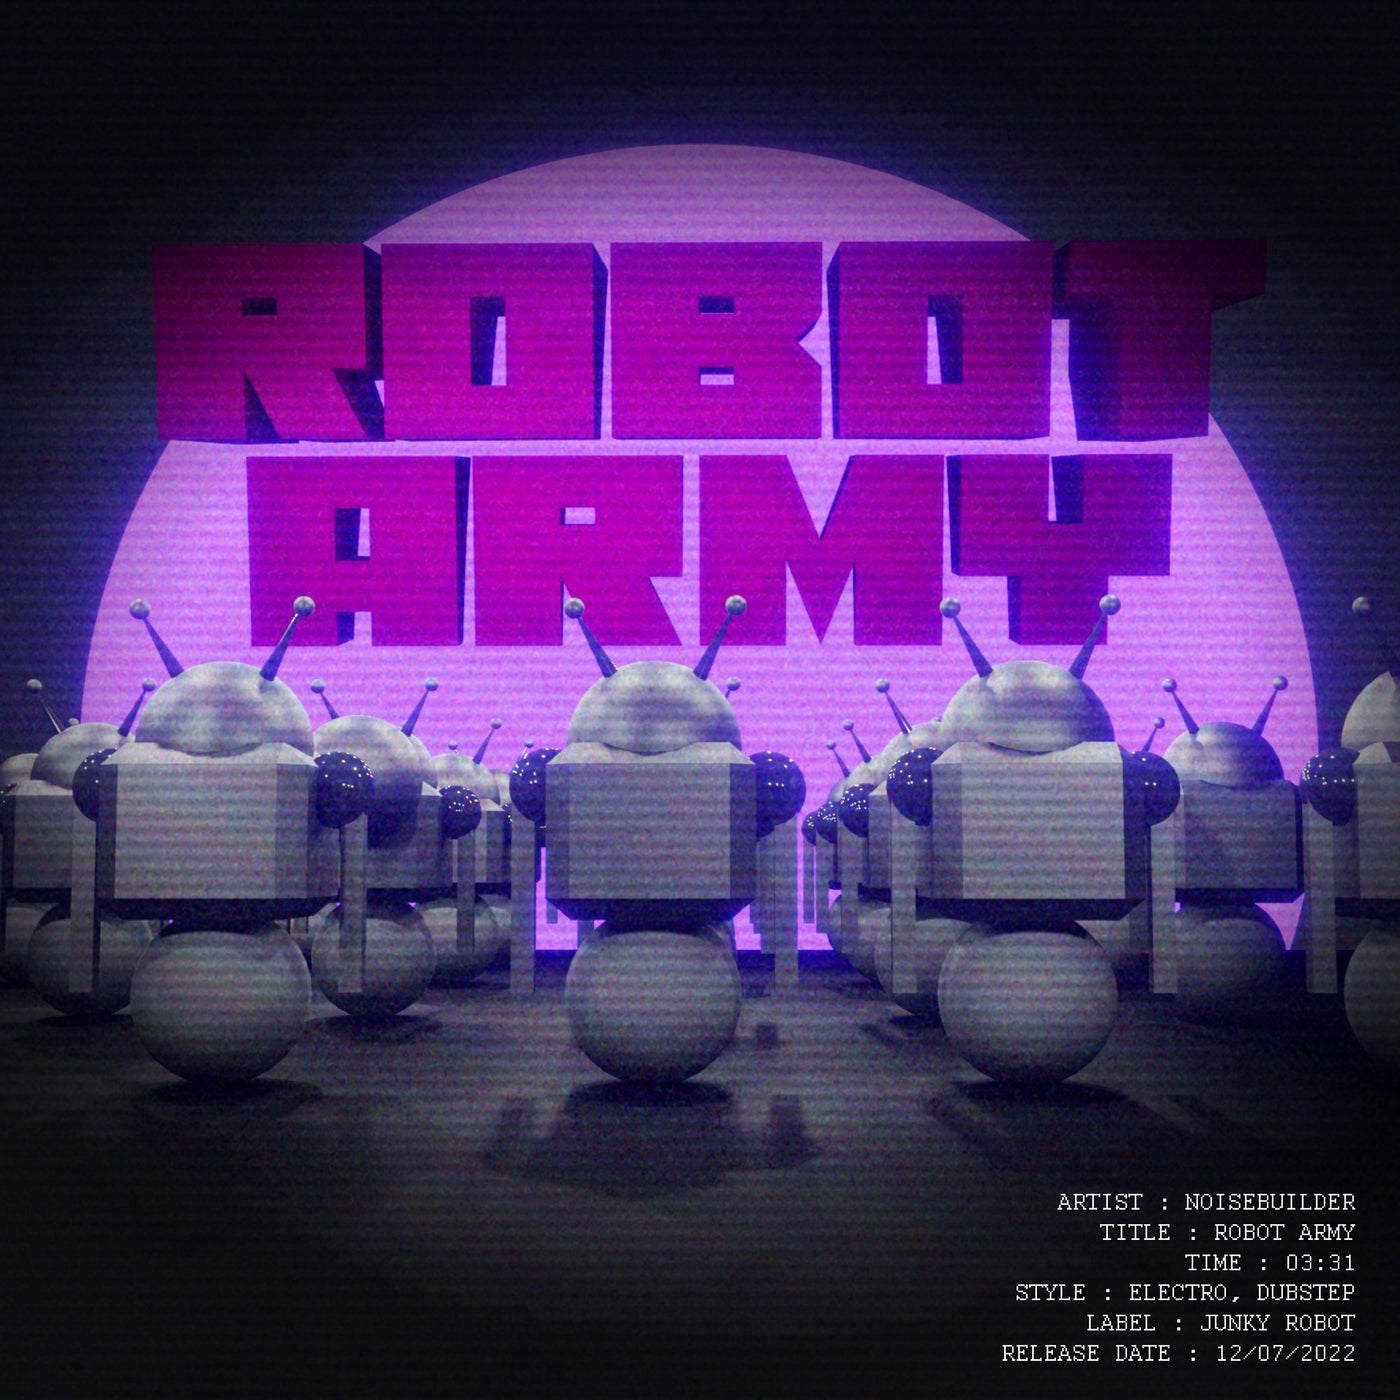 Robot Army